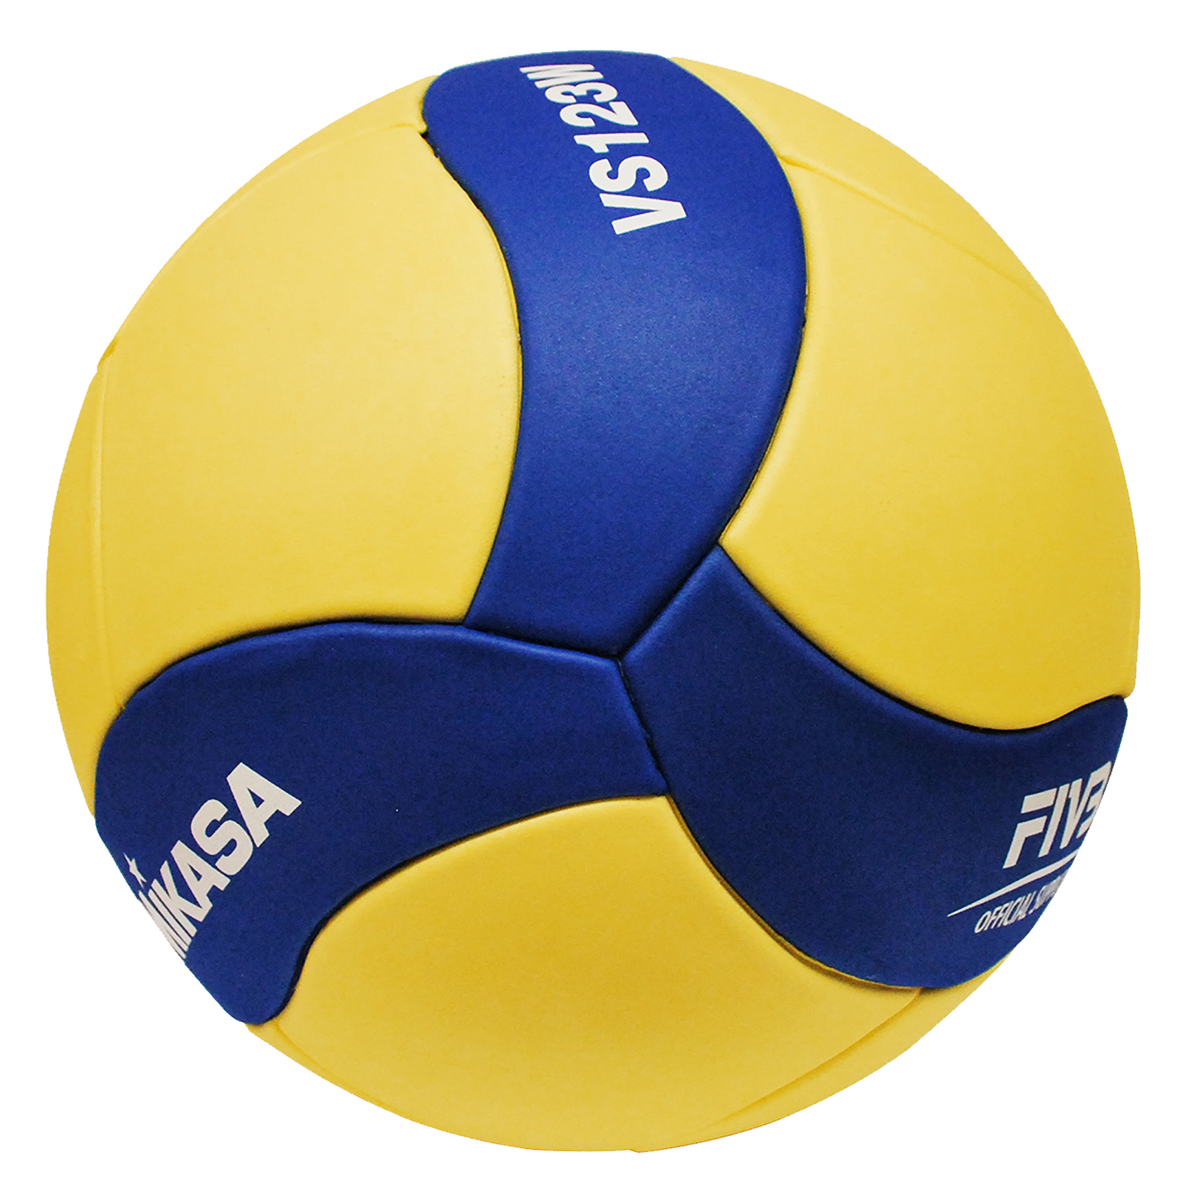 MIKASA VS123W VOLLEYBALL EVA FOAM 18 PANEL SIZE 5, , large image number null